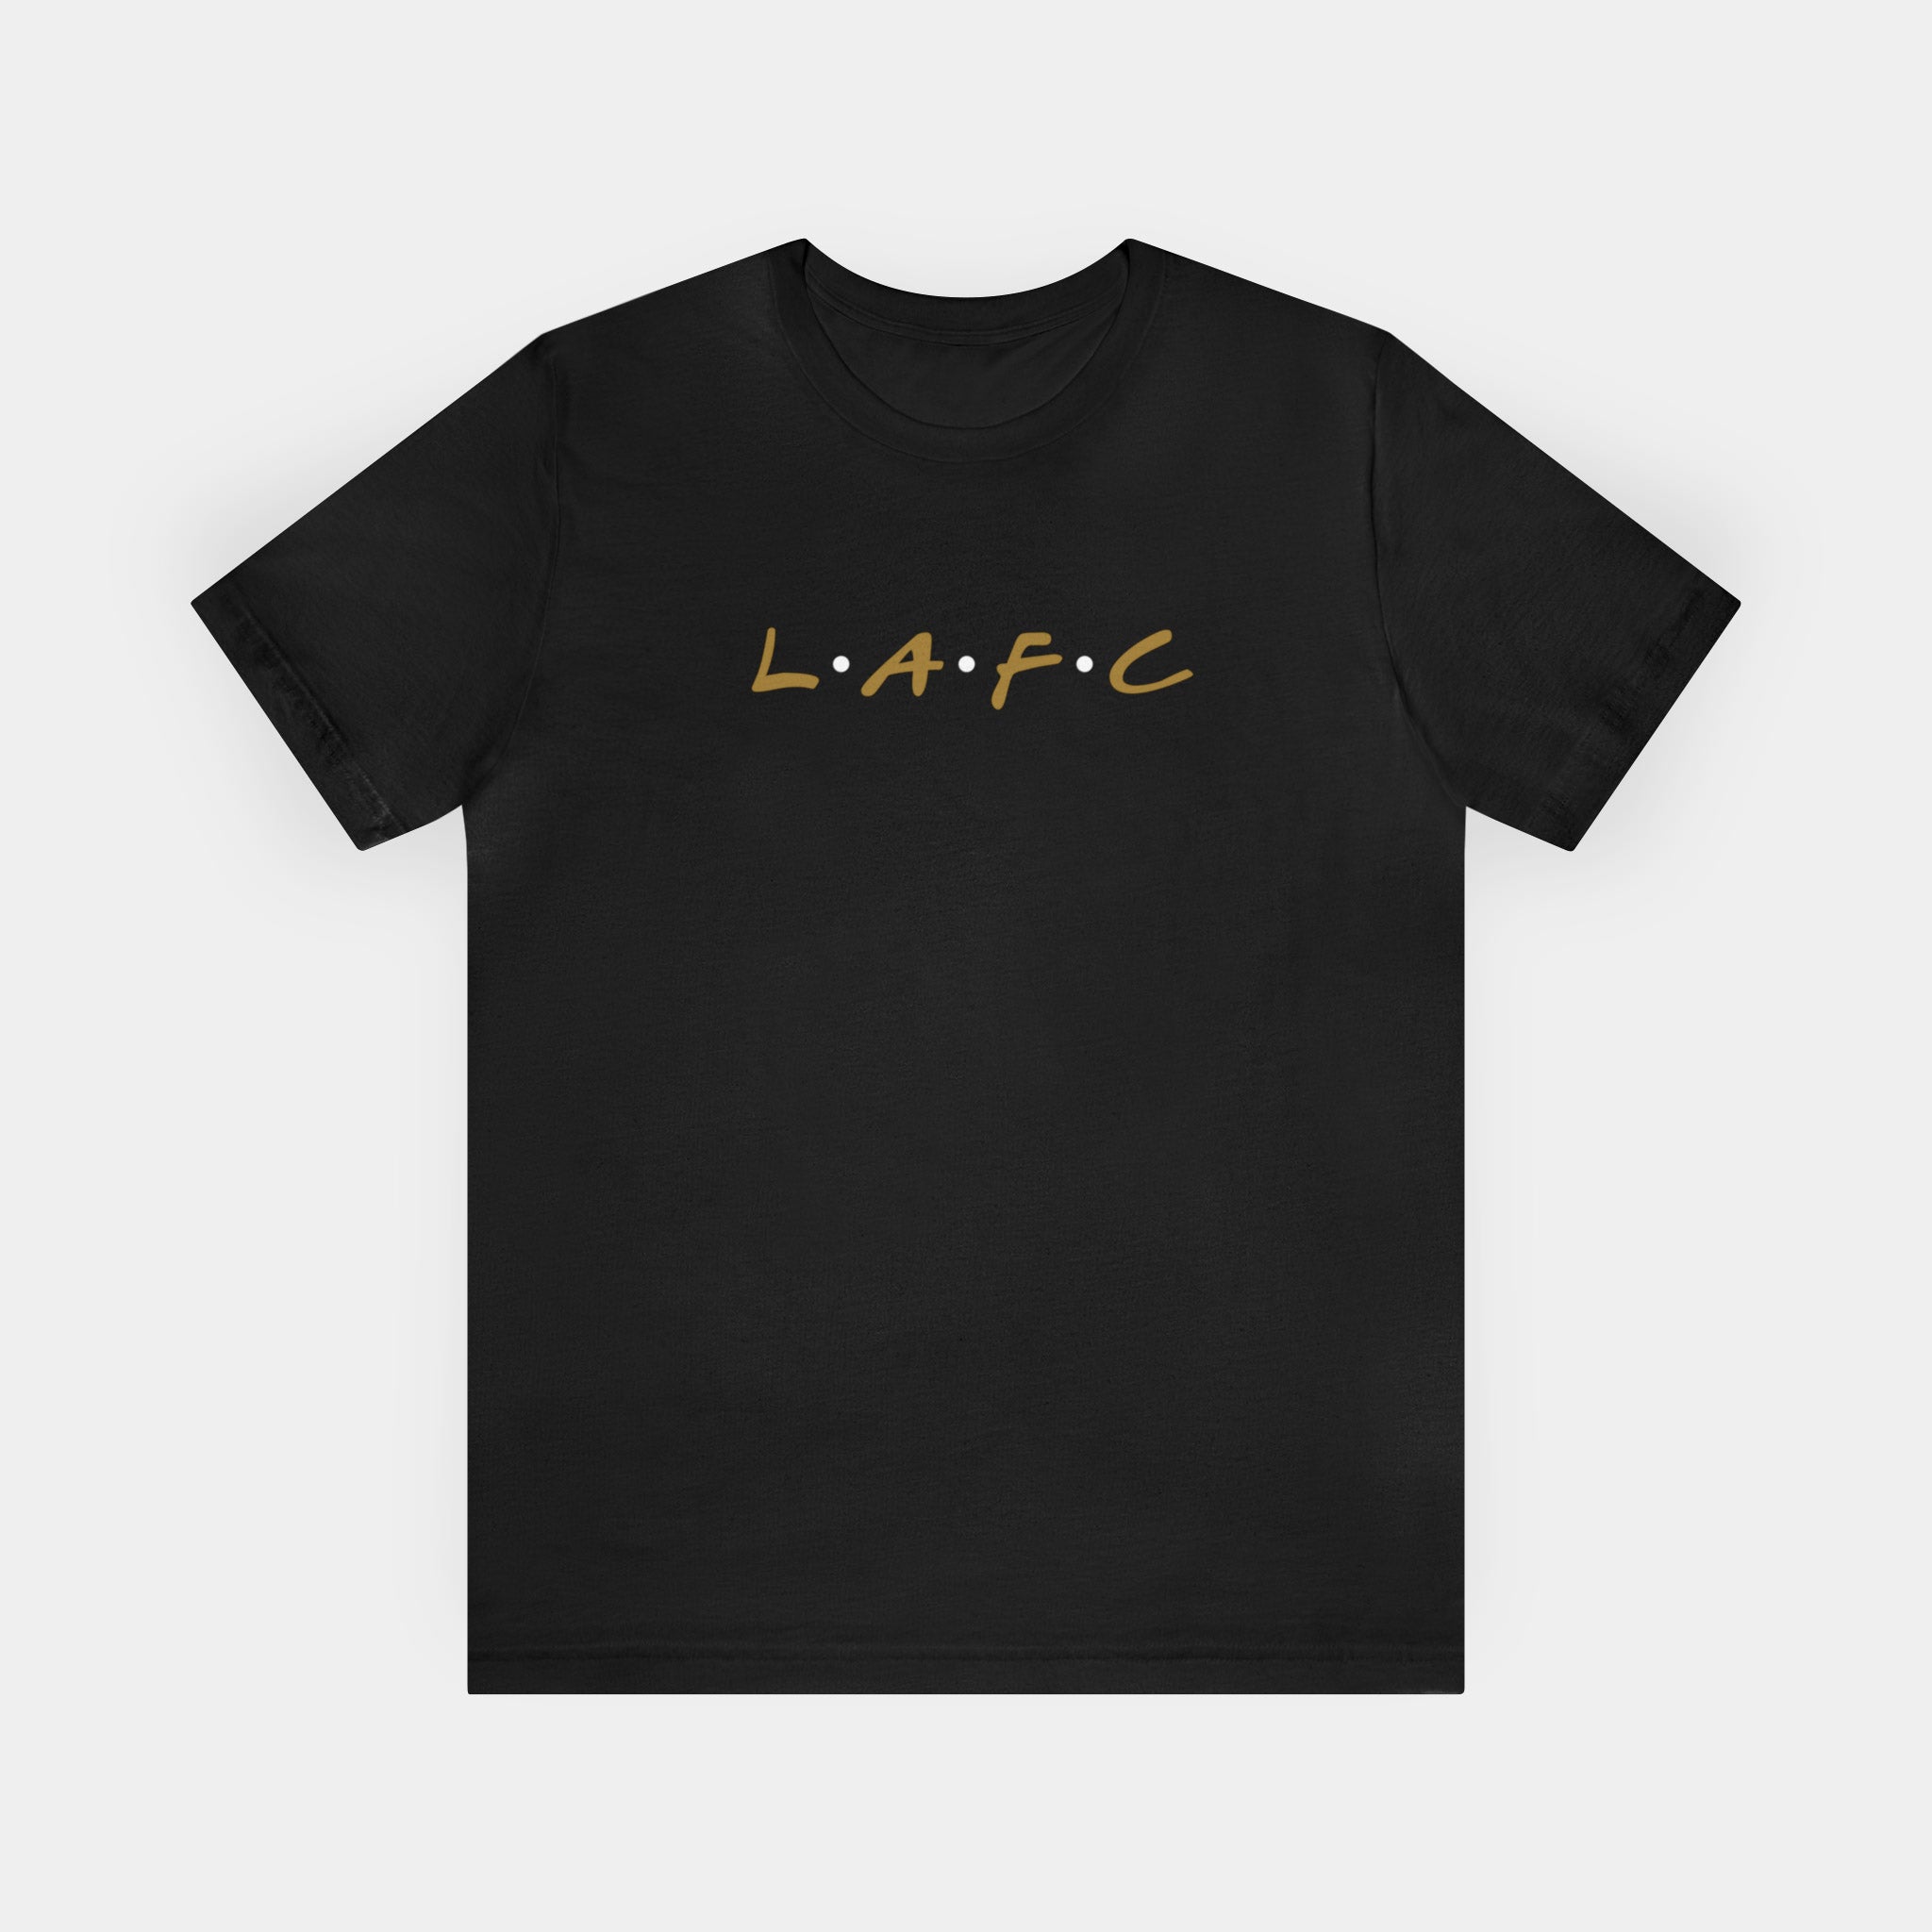 Stronger Together (LAFC)